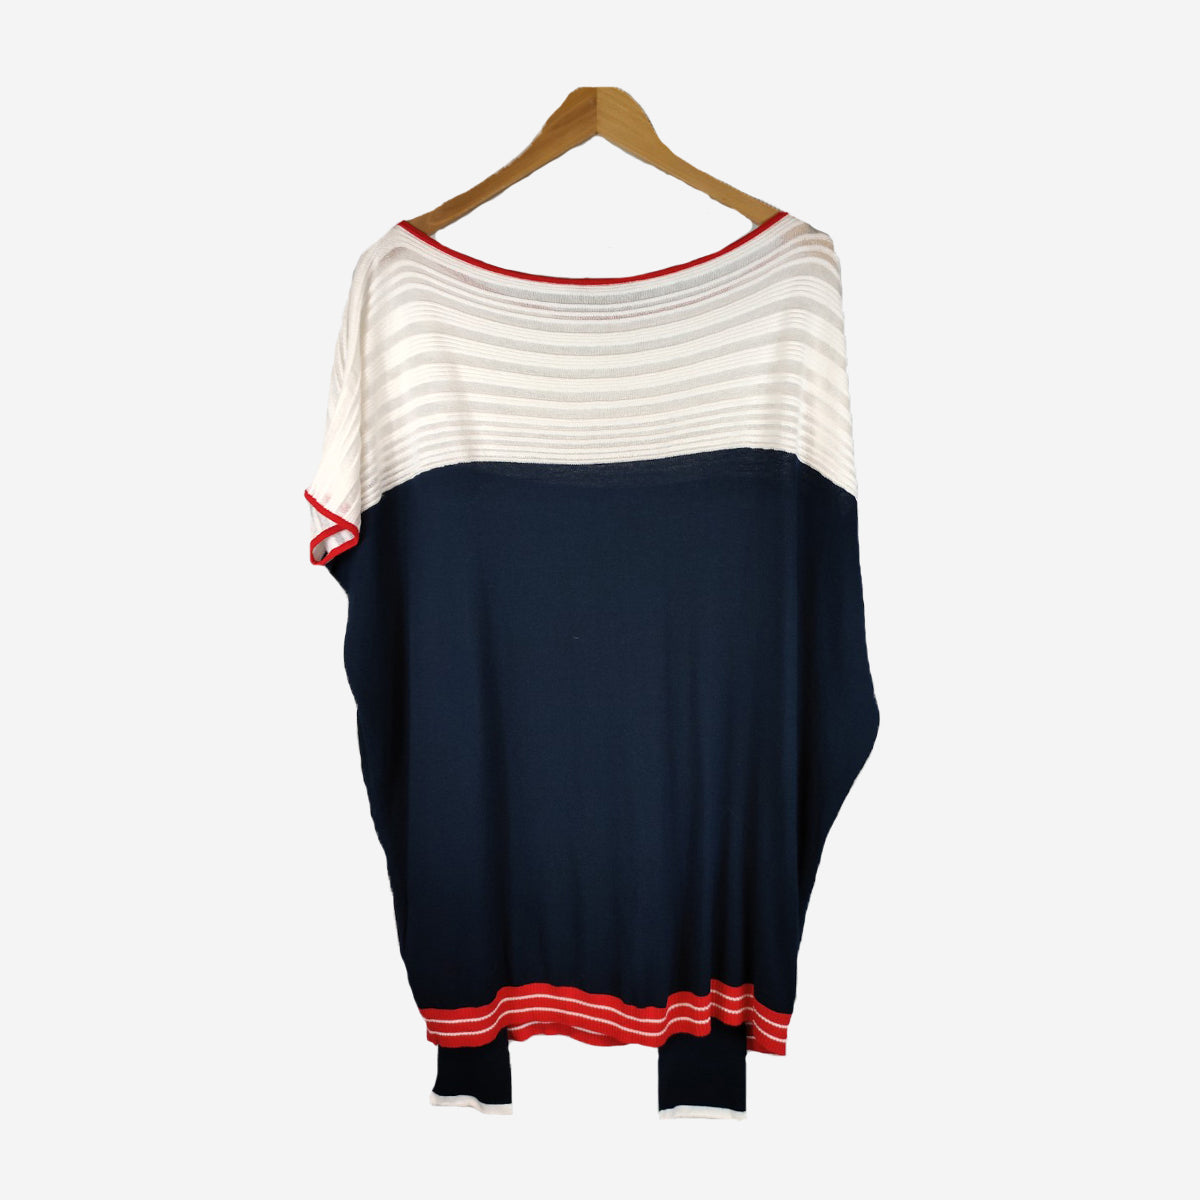 NAVY AND WHITE JUMPER